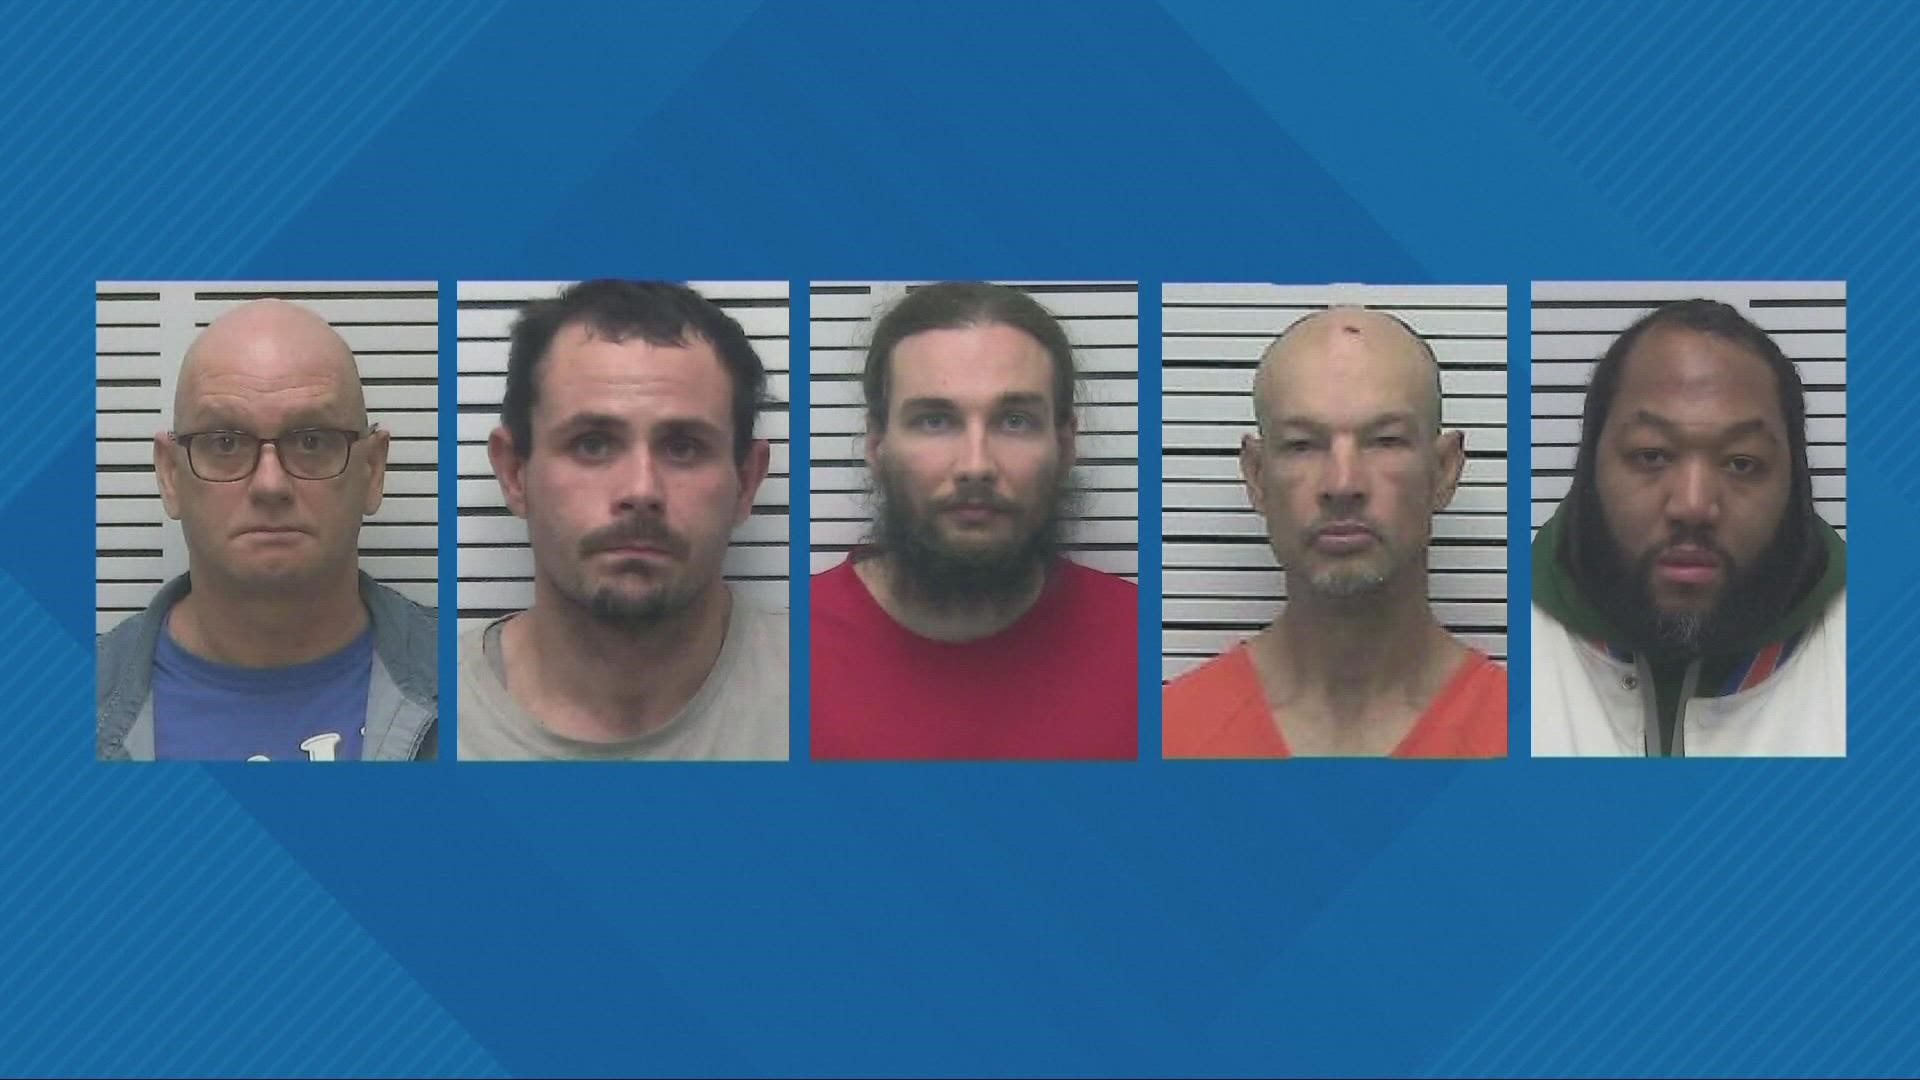 At this time, the fugitives' exact location is unknown. Officials say three of them have been classified as 'sexually violent predators.'